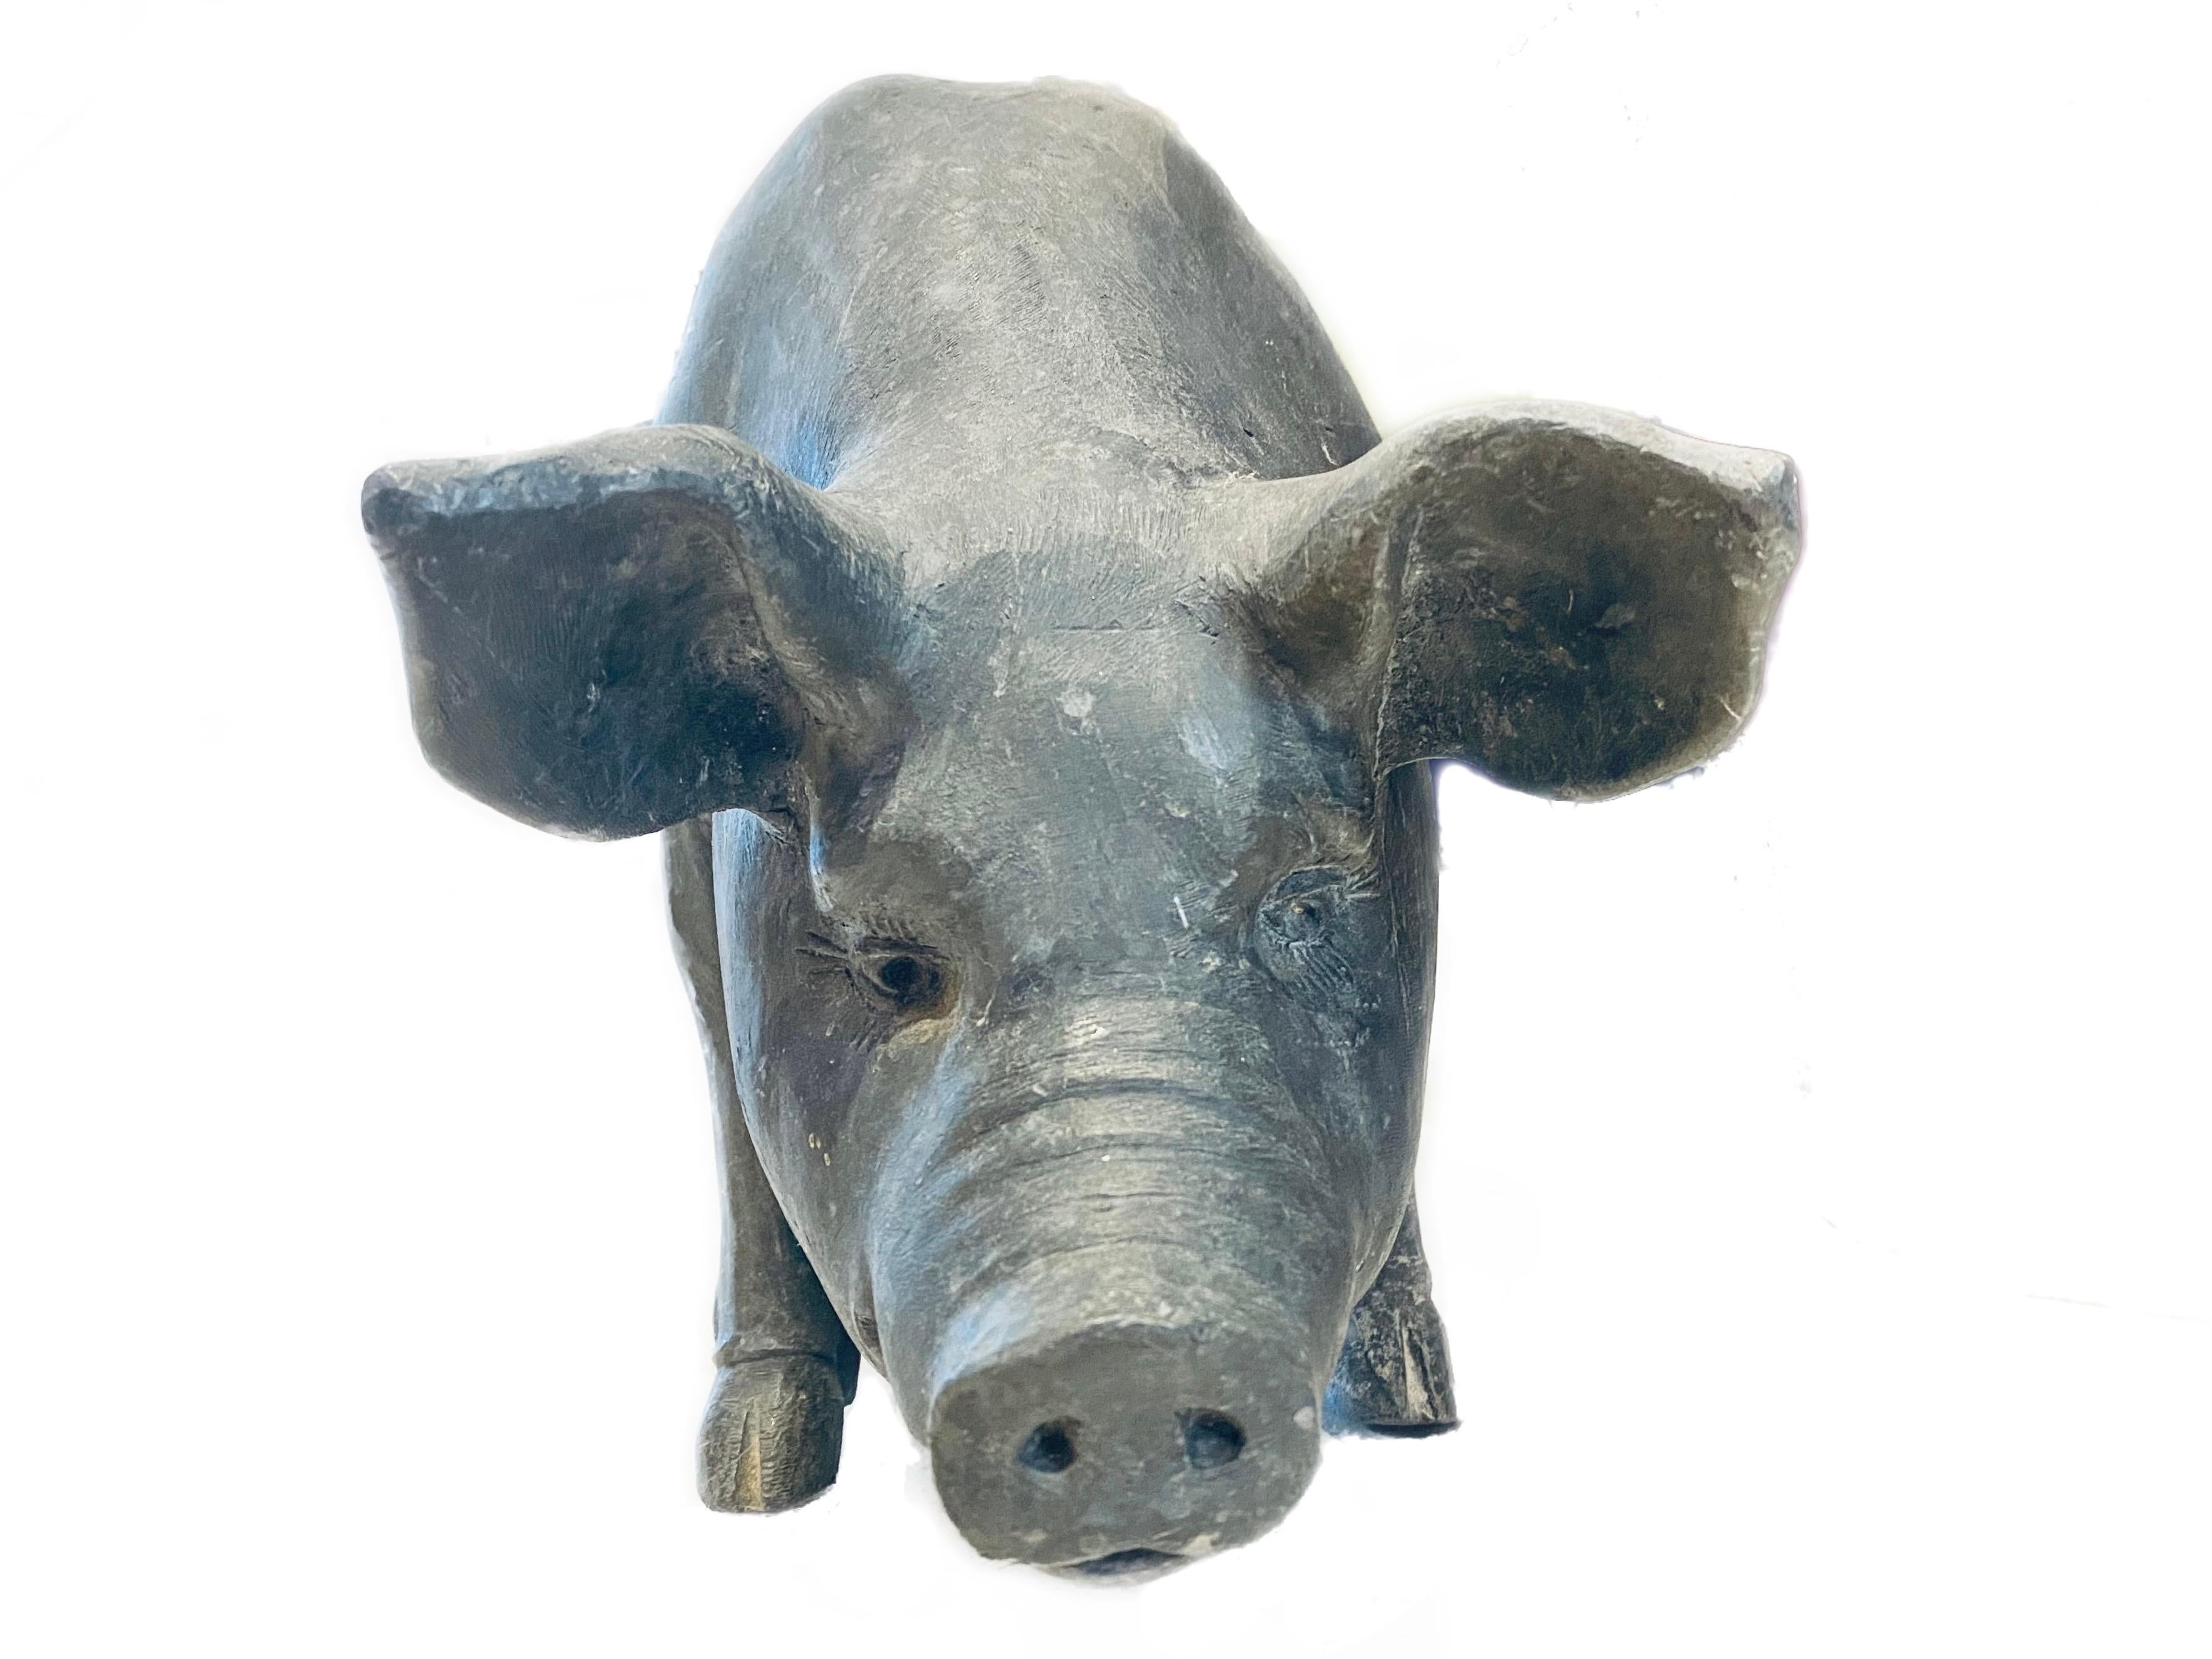 
Antique Lead pig in excellent condition. The details are amazing and this pig has character. the pics are accurate and she is in excellent condition! Fine collectors items and very rare to find, reproductions have been made but this girl is all